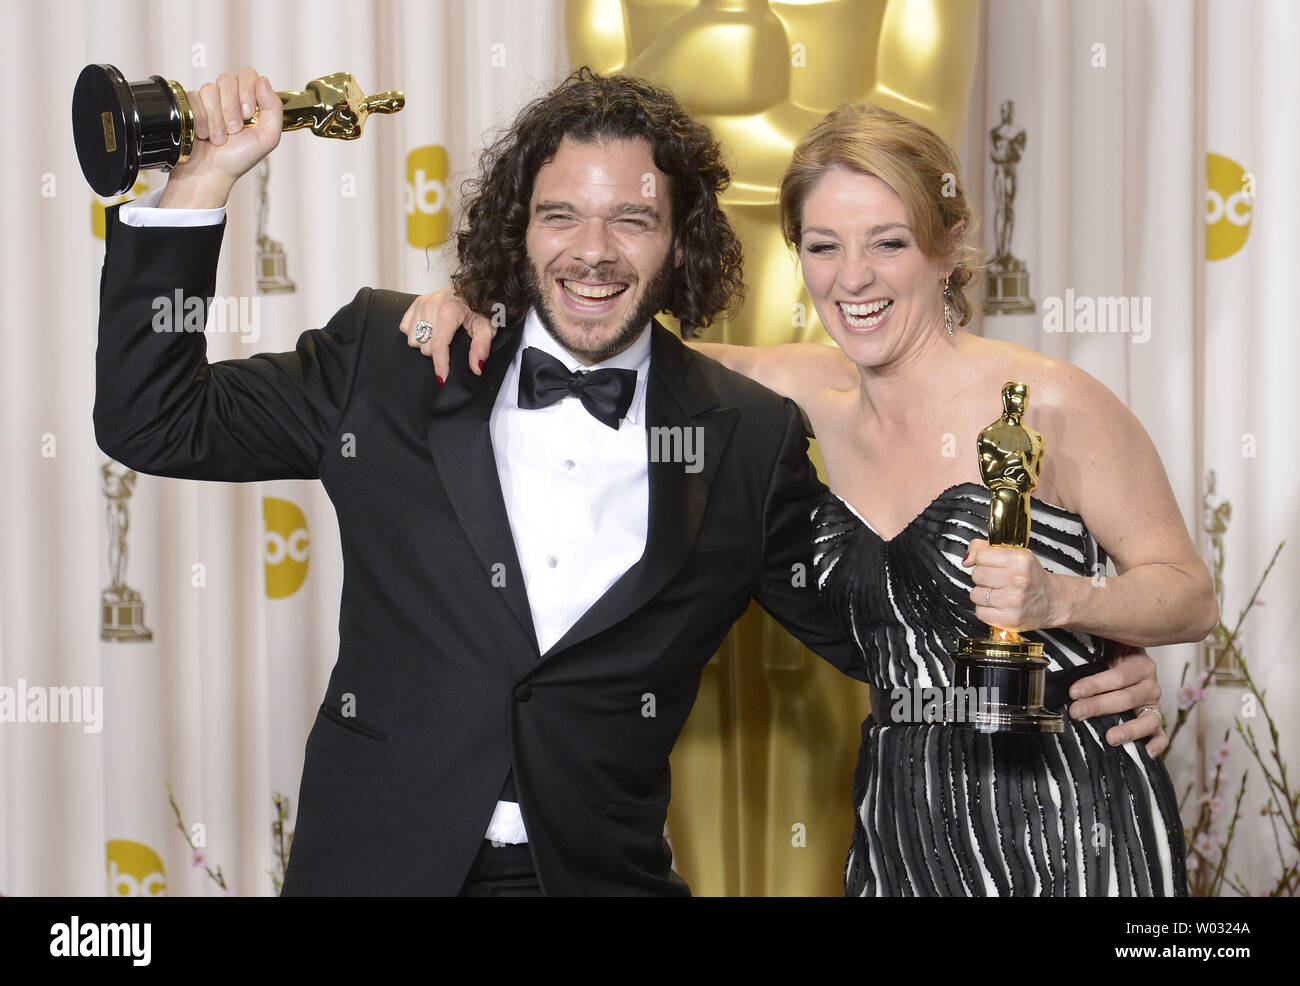 Sean Fine and Andrea Nix Fine pose with their Oscars for Best Documentary Short Subject for 'Inocente' backstage at the 85th Academy Awards at the Hollywood and Highlands Center in the Hollywood section of Los Angeles on February 24, 2013. UPI/Phil McCarten Stock Photo